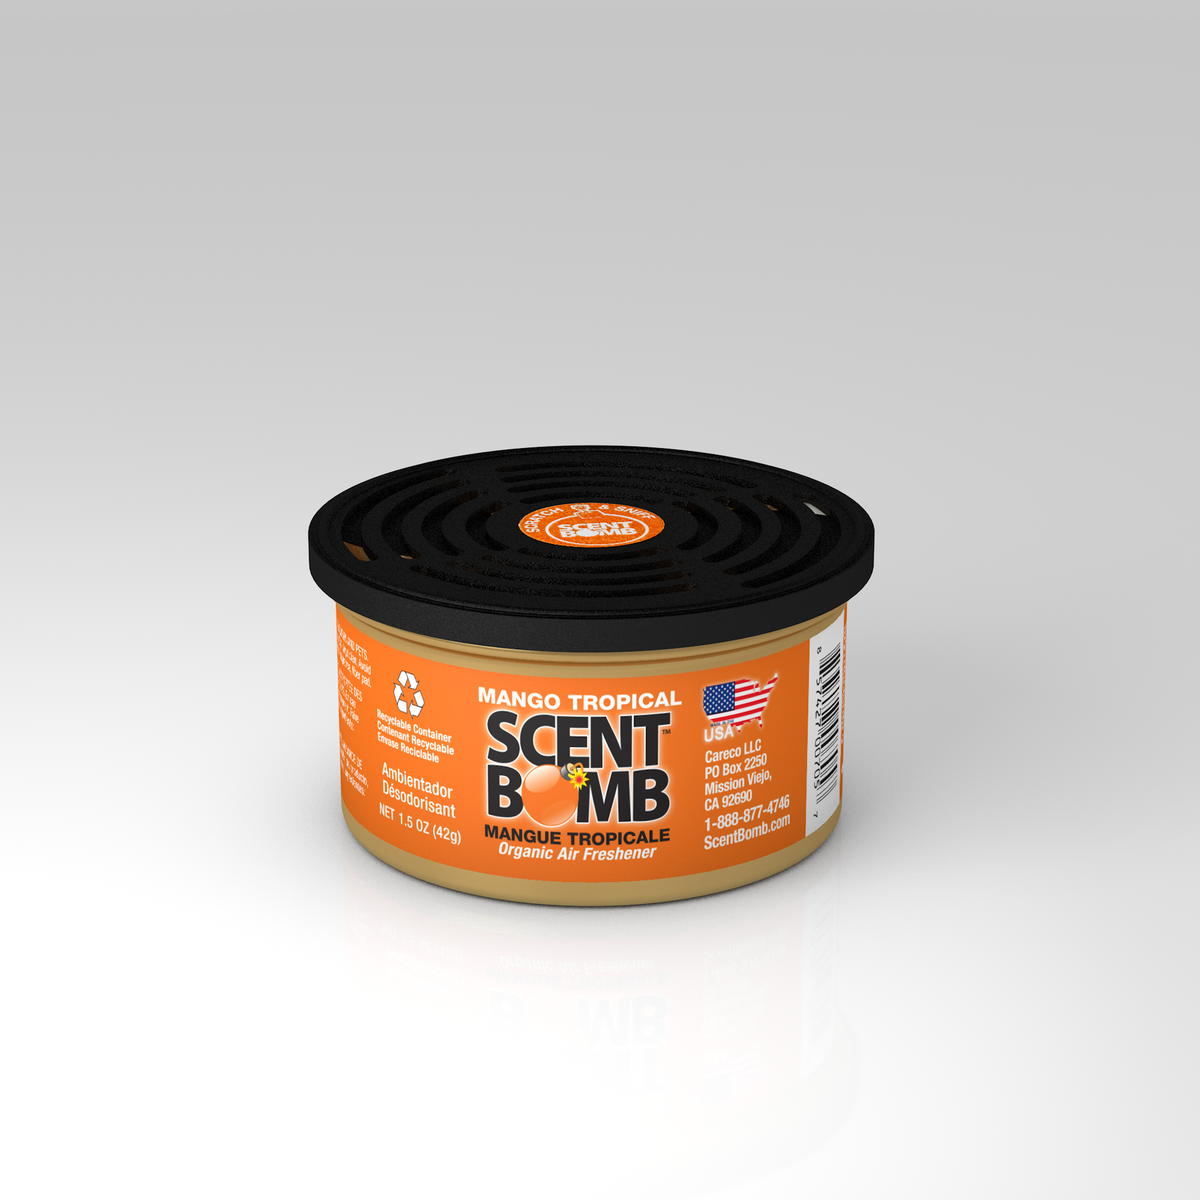 SCENT CANS